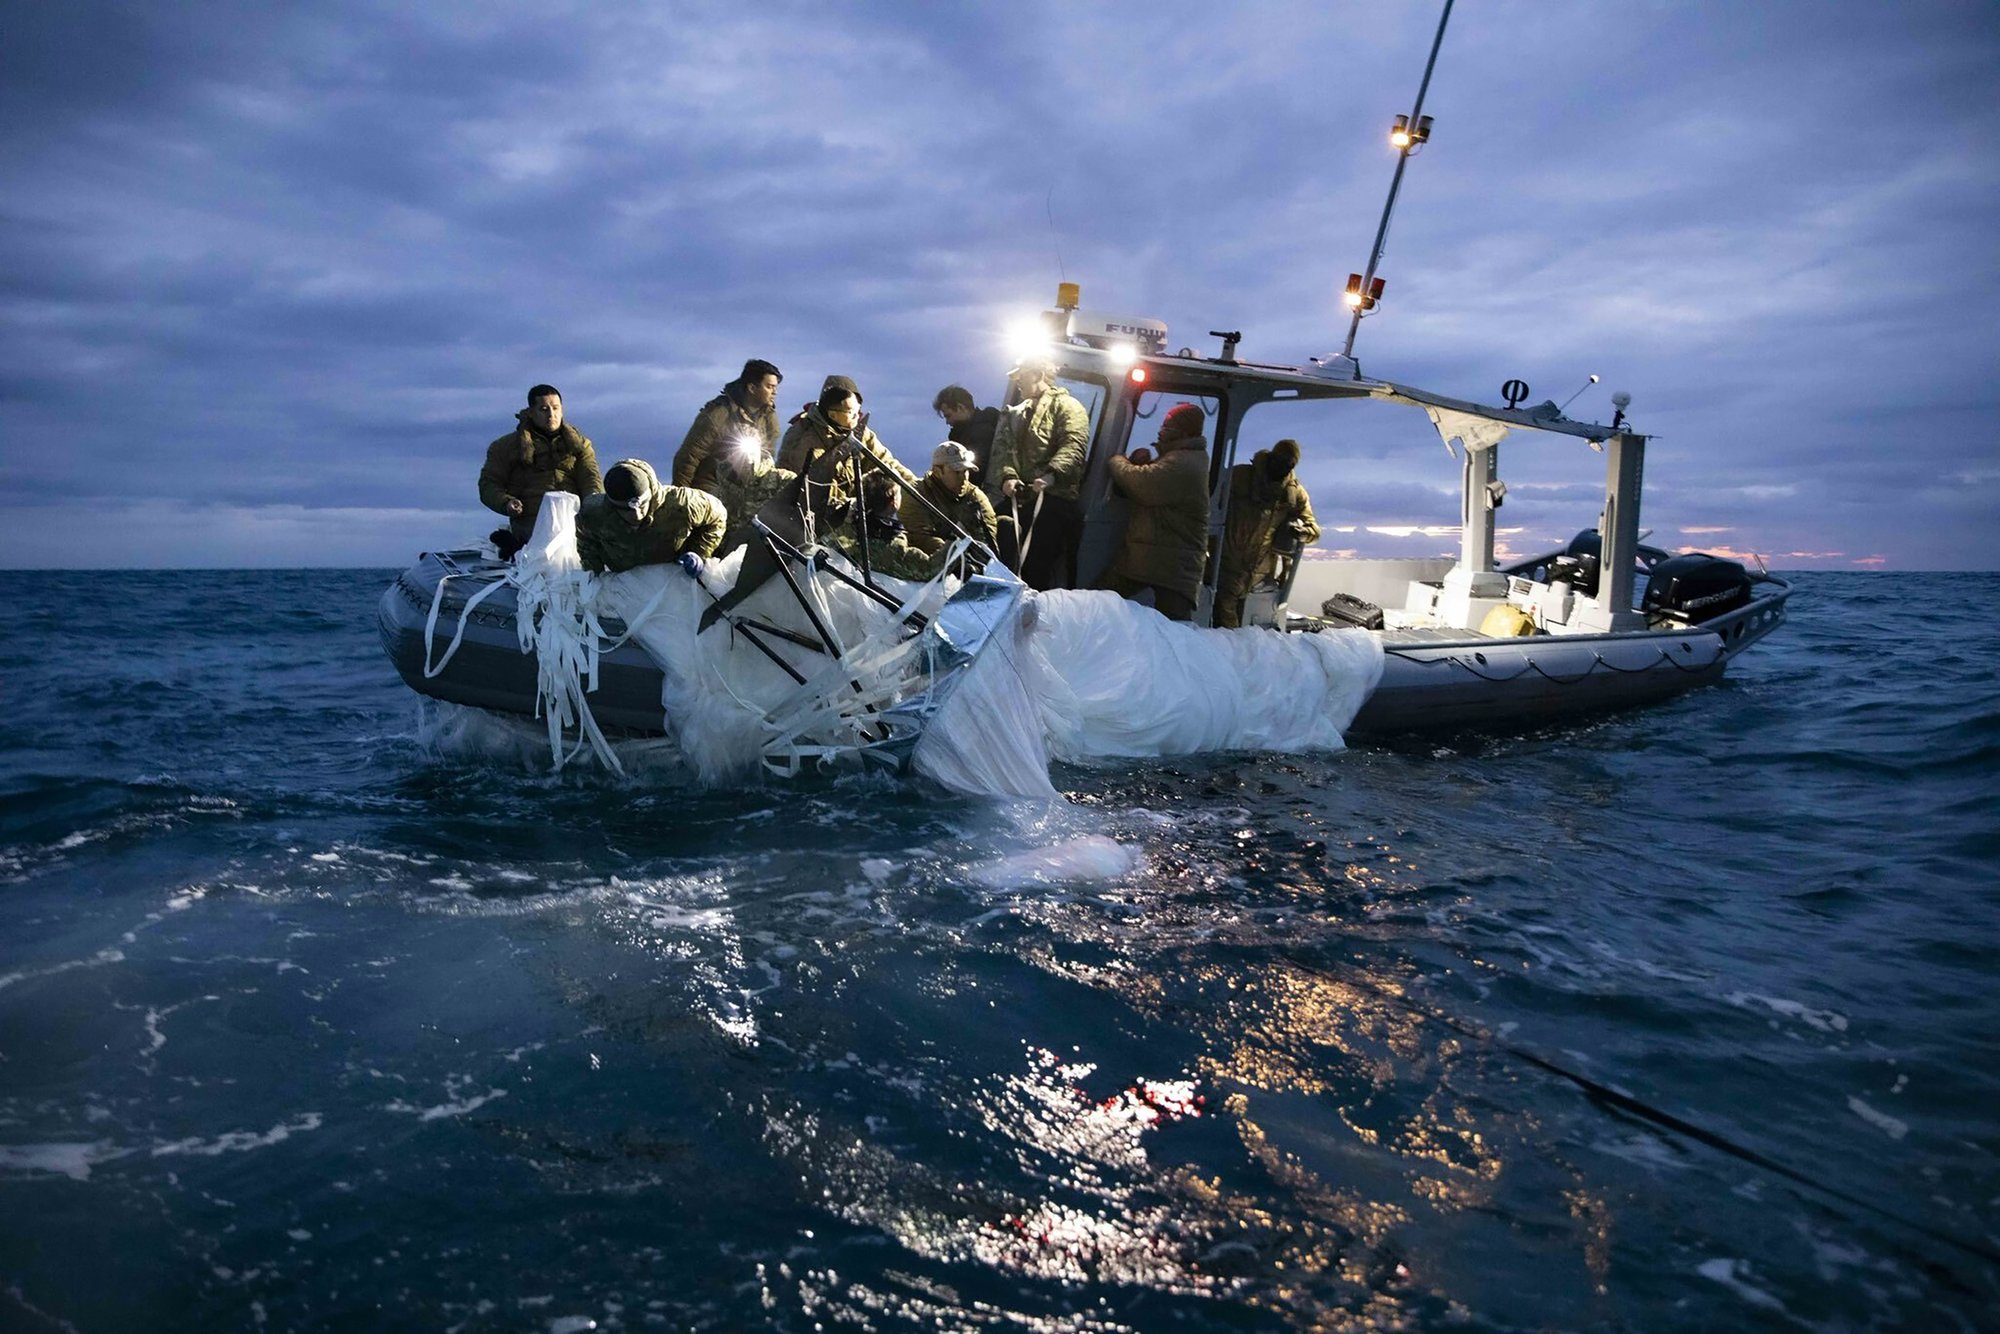 This image provided by the U.S. Navy shows sailors assigned to Explosive Ordnance Disposal Group 2 recovering a high-altitude surveillance balloon off the coast of Myrtle Beach, S.C., Feb. 5, 2023. (U.S. Navy via AP)